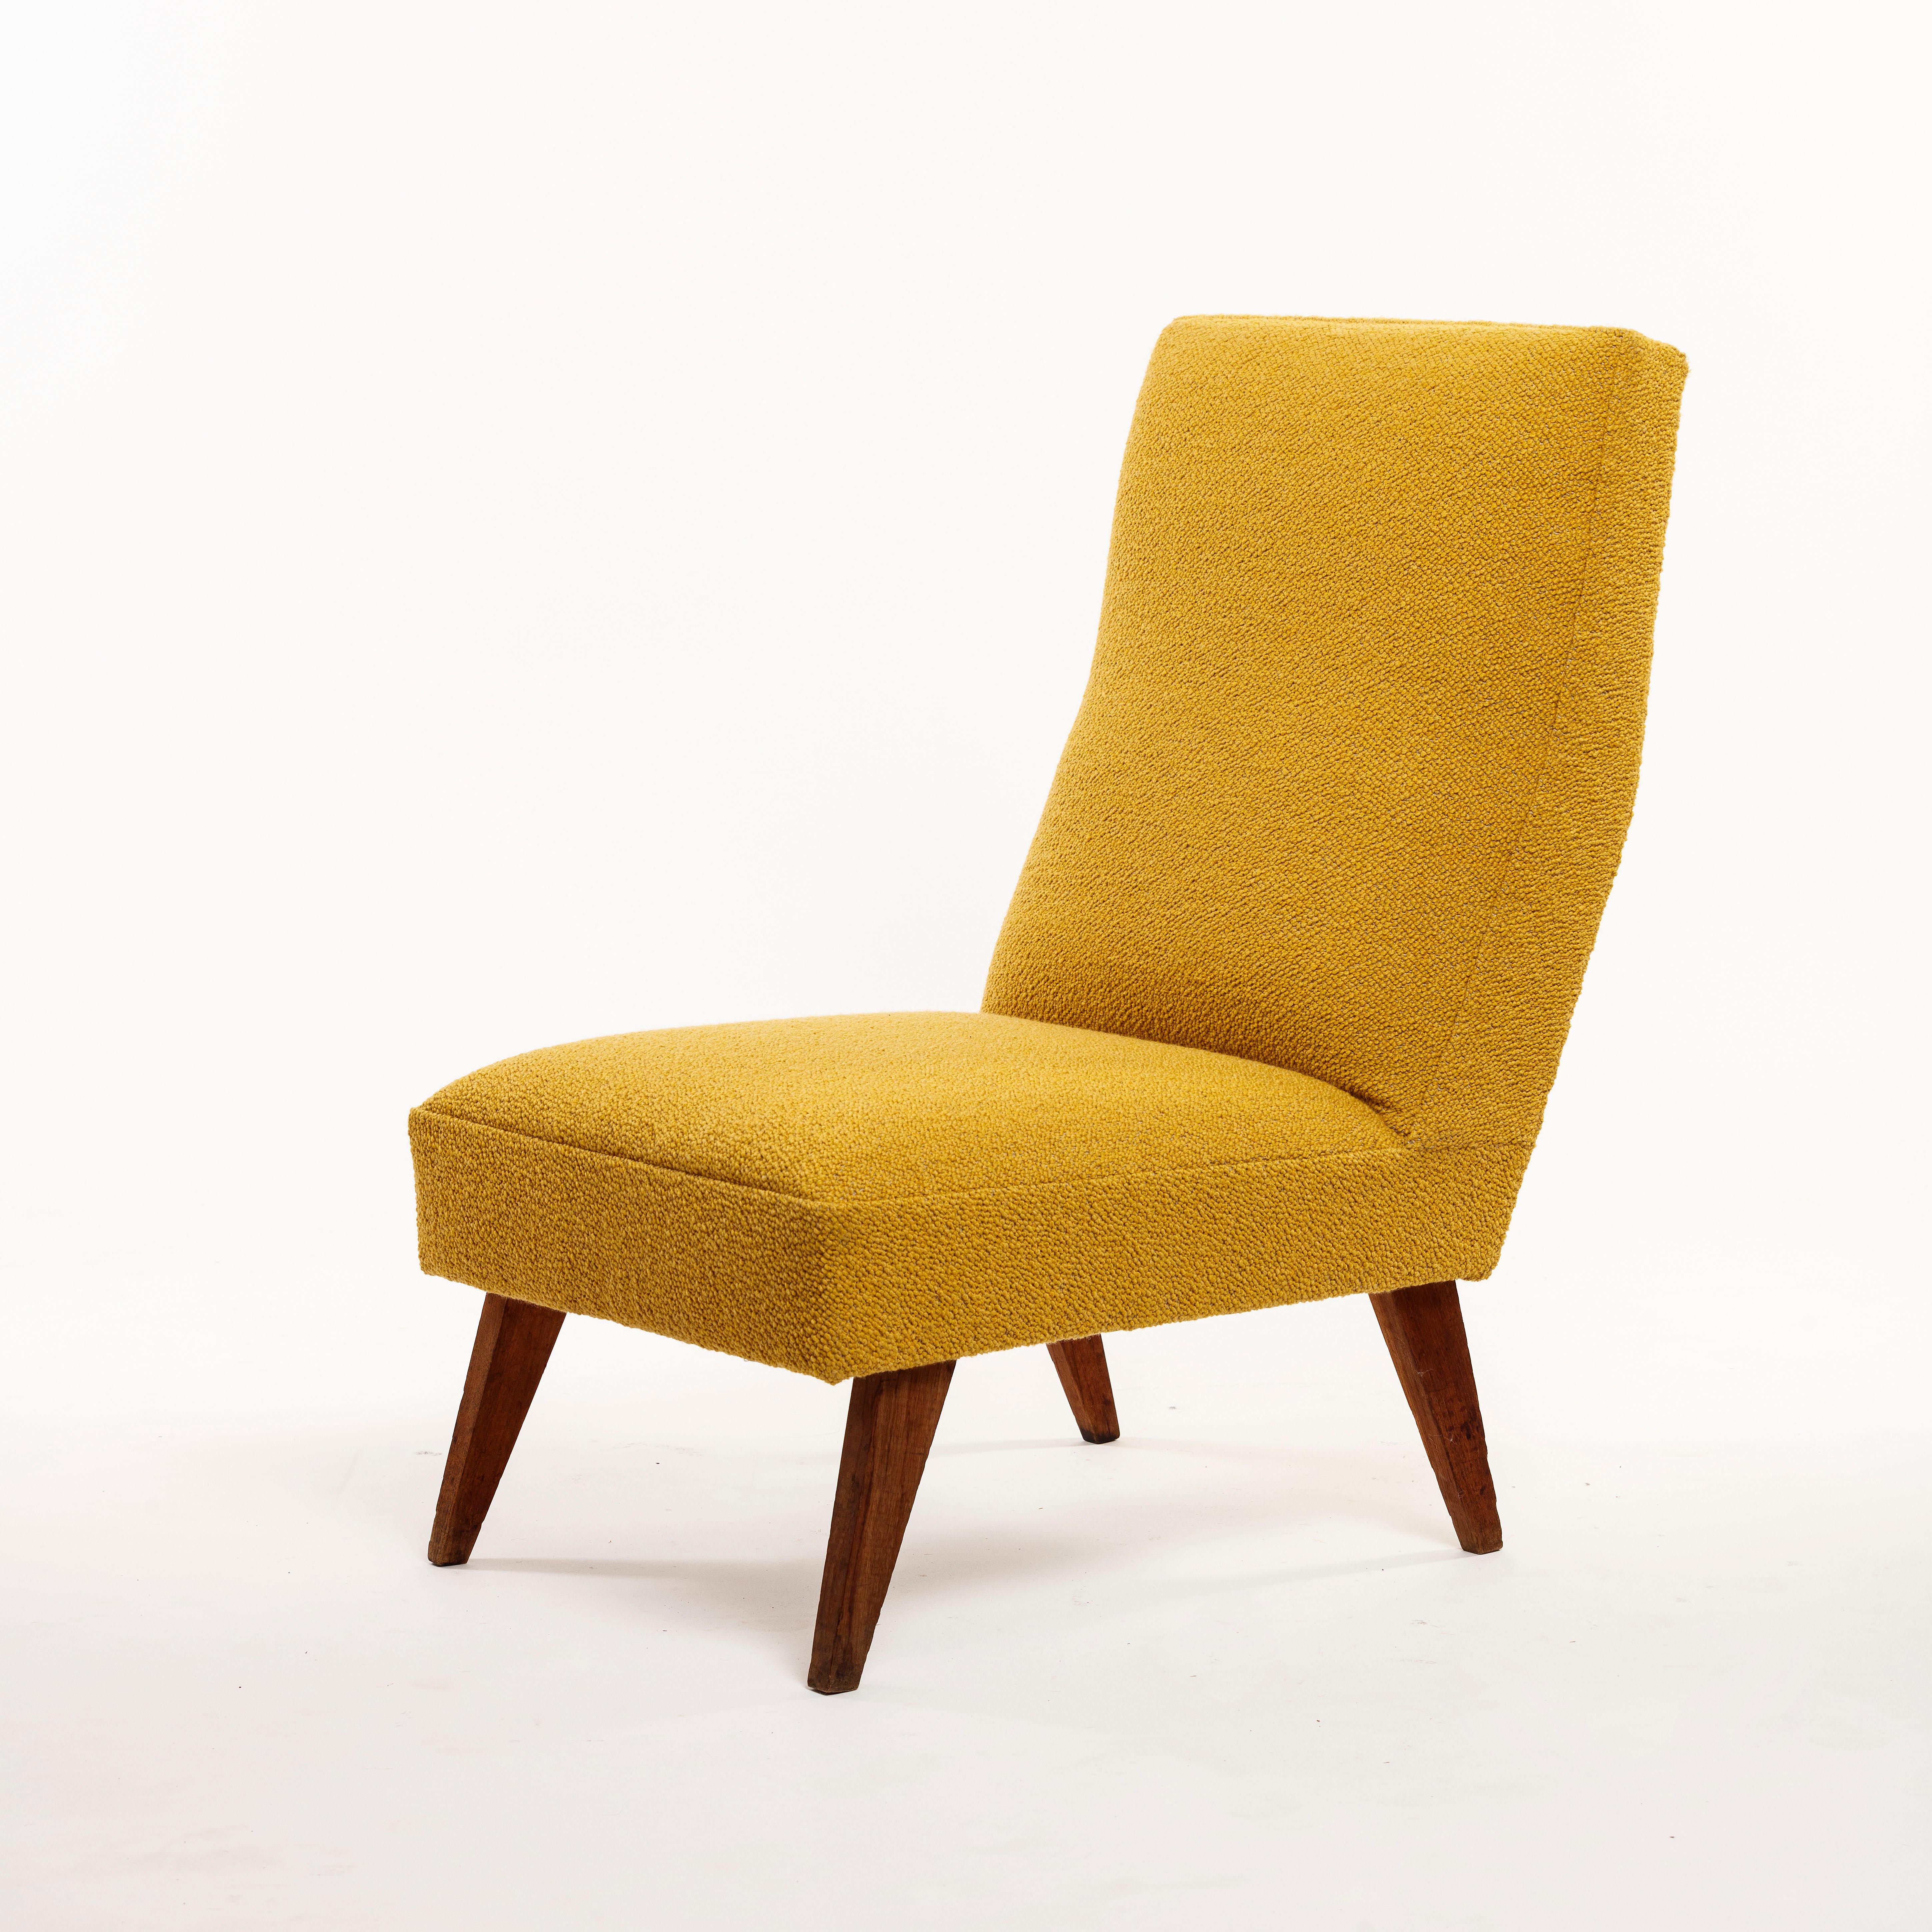 LOUNG CHAIR ROSET ÉDITEUR - COLLECTION DU CROUS DE L'ACADÉMIE DE VERSAILLES 1955
Model 346, furniture for the Jean Zay University Residence in Antony, France
Suite of 2 armchairs; Compass-style legs in oak.
Seats and backrests reupholstered with